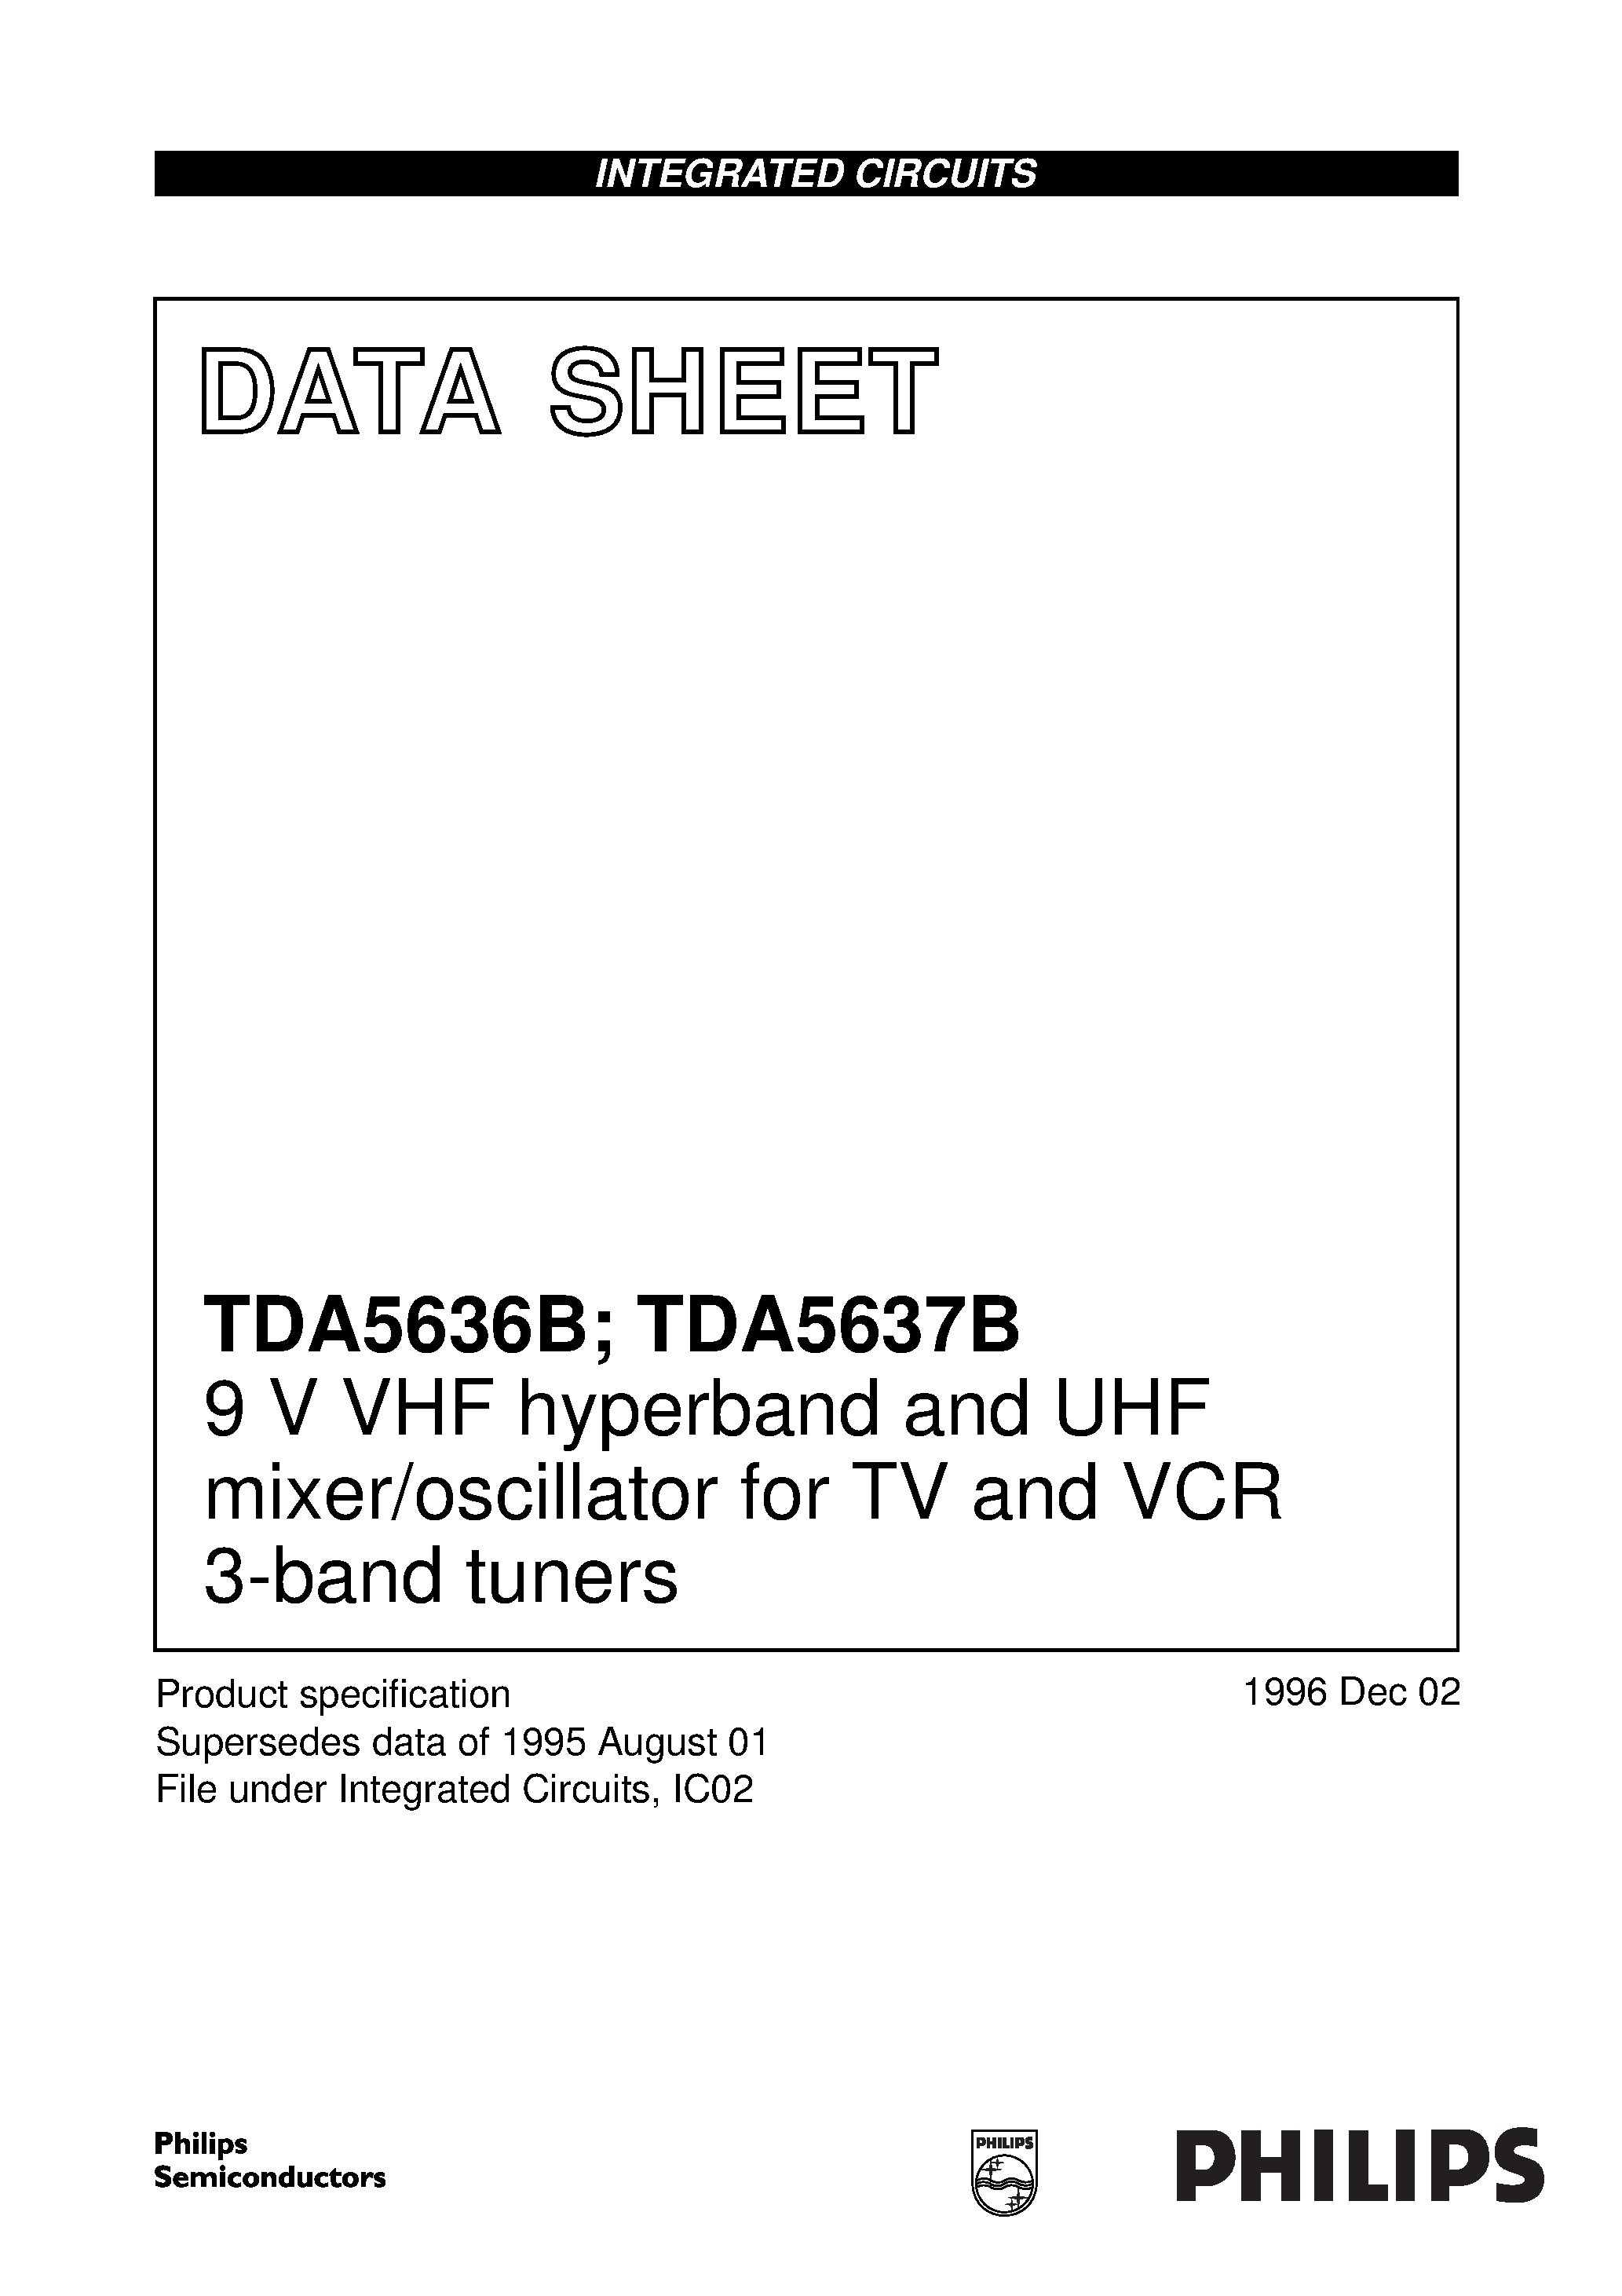 Datasheet TDA5637BT - 9 V VHF hyperband and UHF mixer/oscillator for TV and VCR 3-band tuners page 1